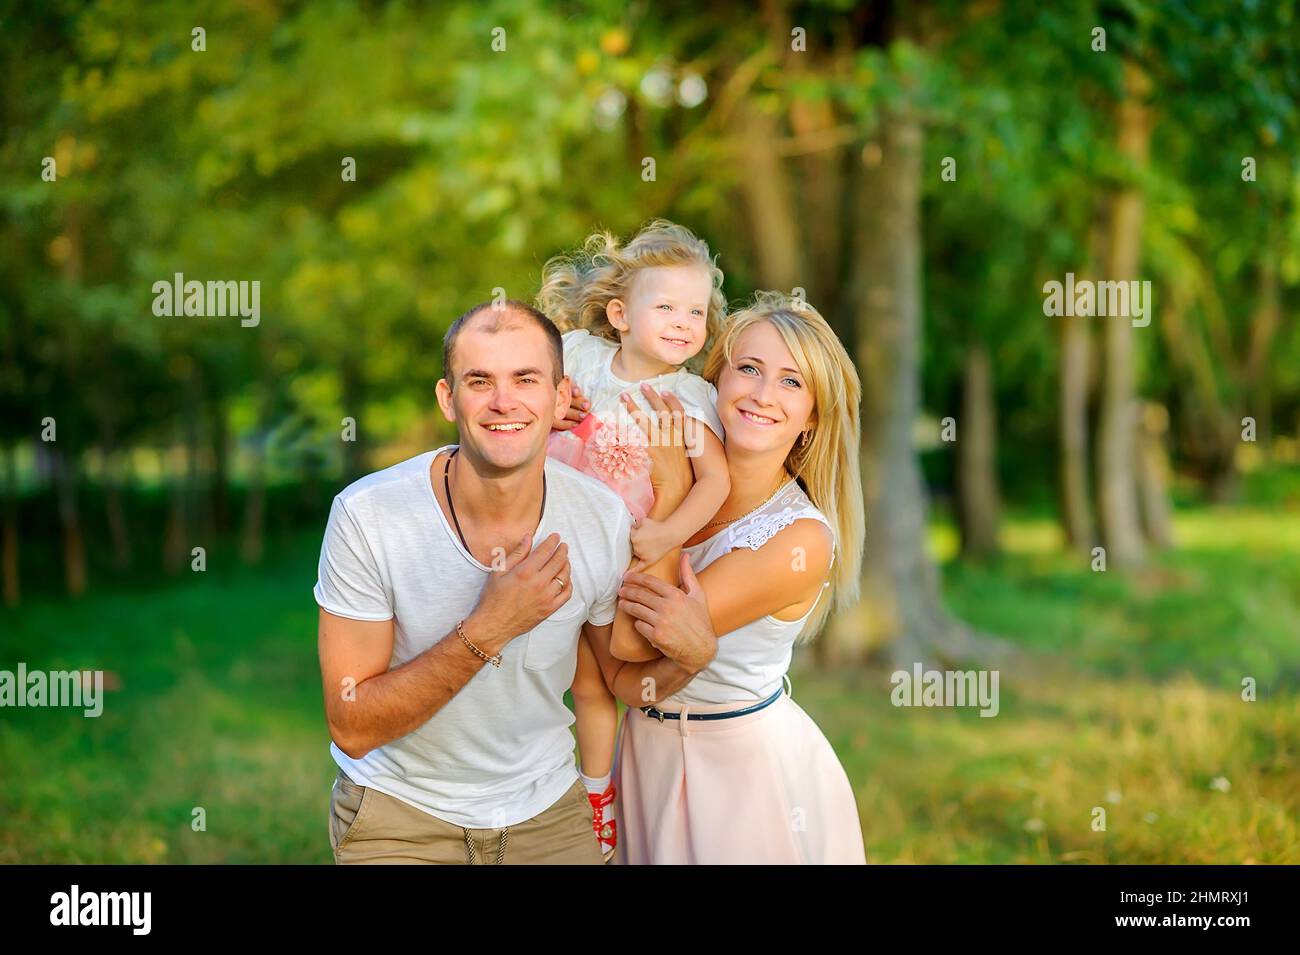 Happy family in a beautiful spring park, healthy outdoor recreation Stock Photo